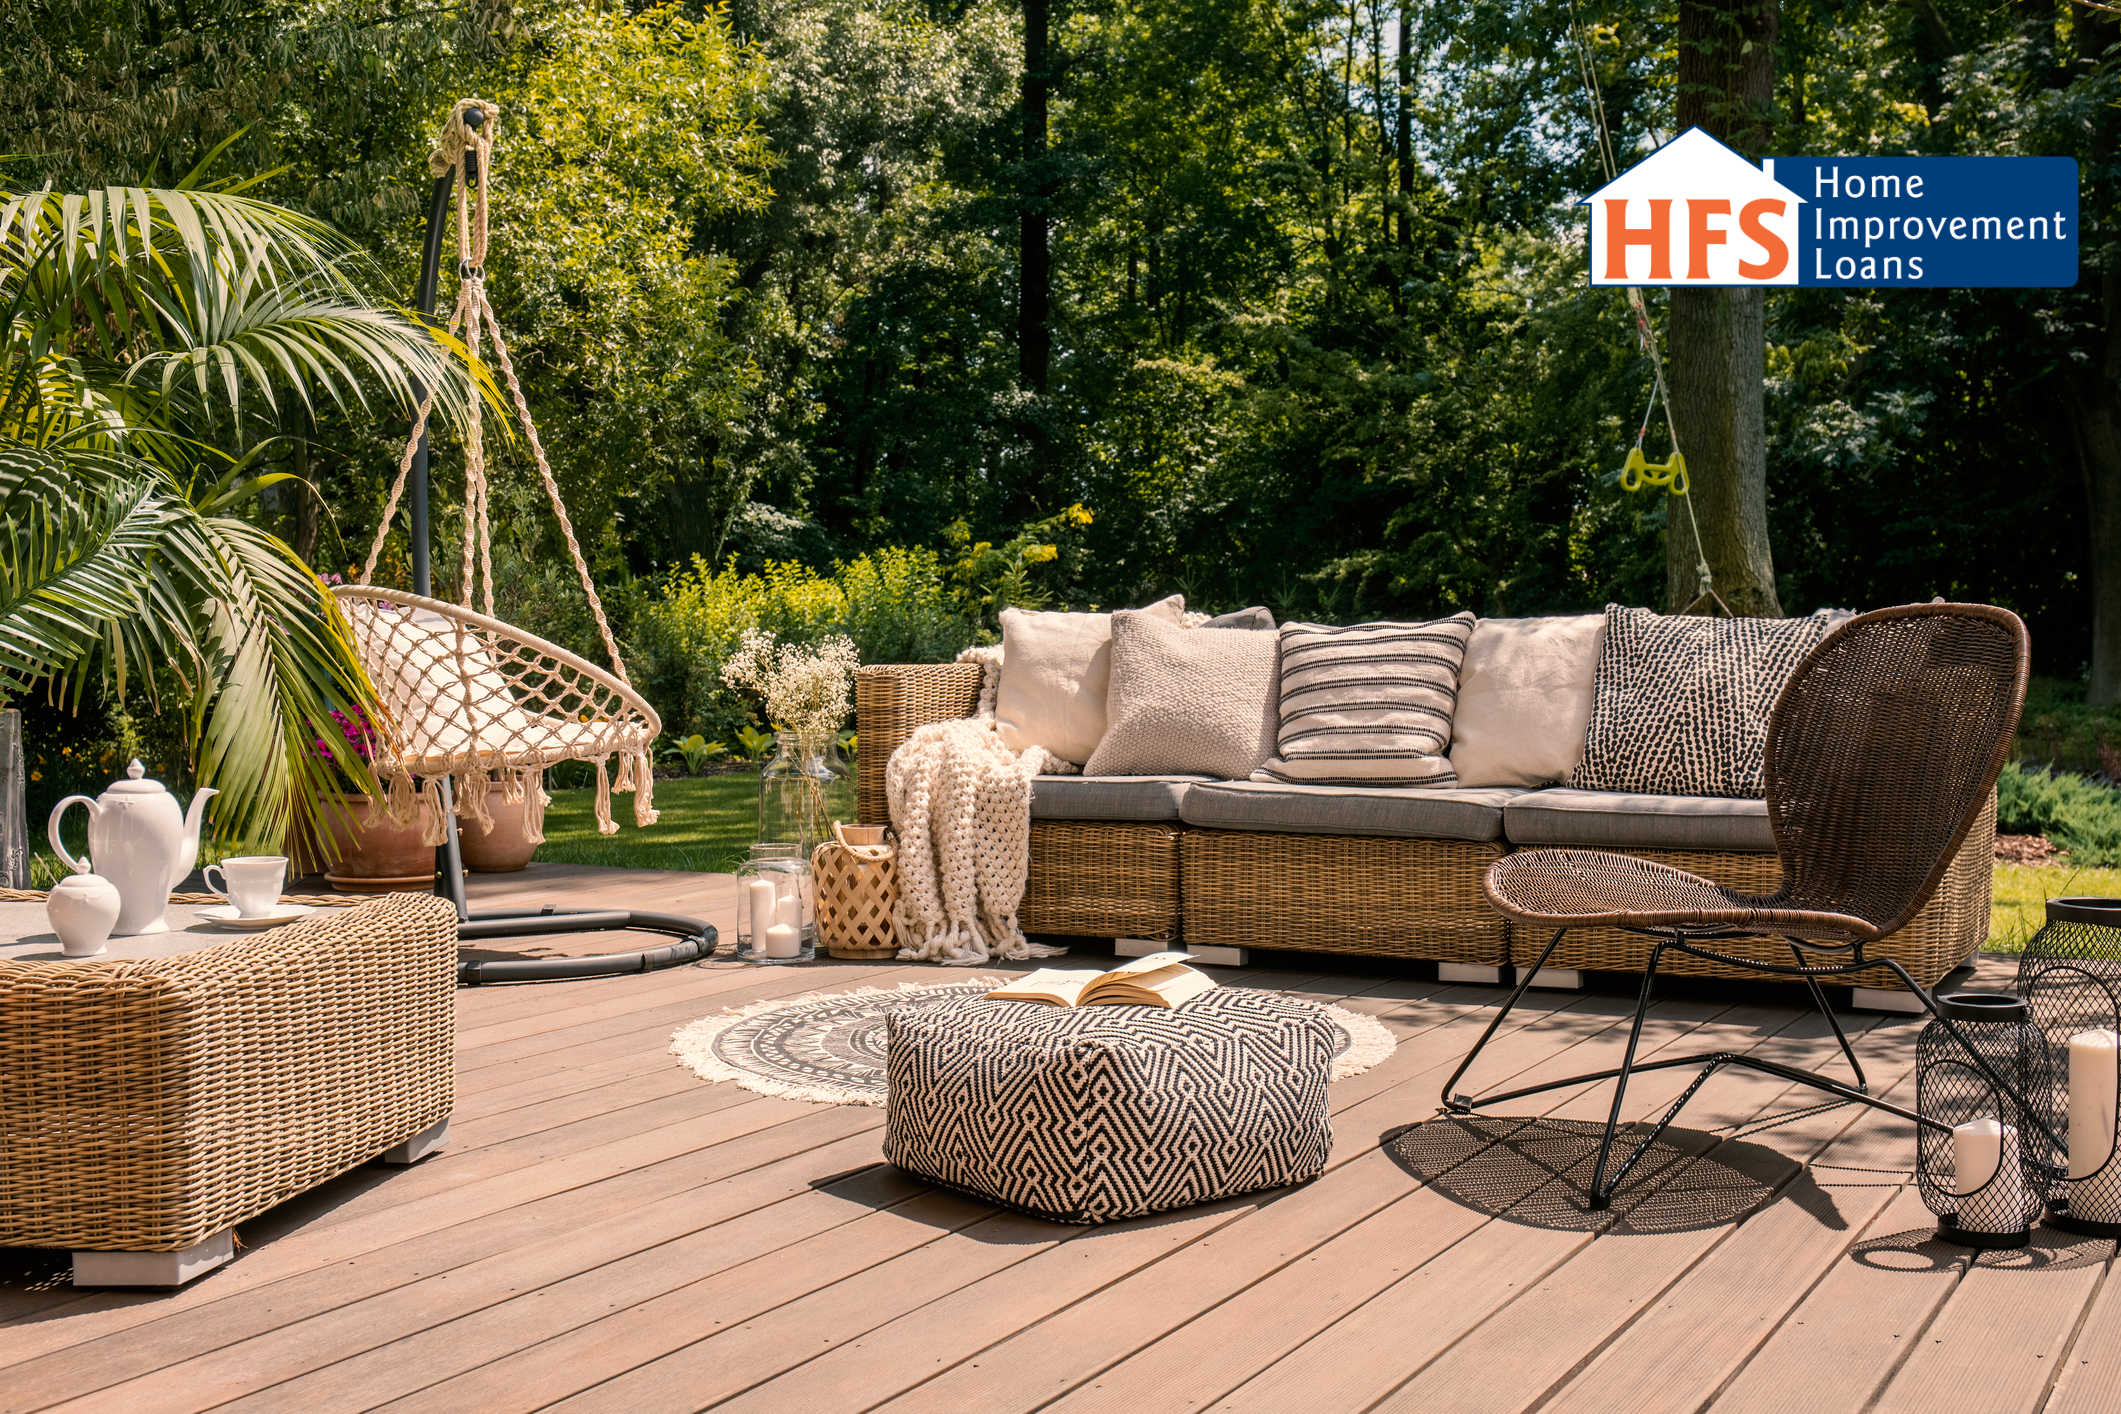 Deck and Porch Upgrades Make an Ideal Spring Promotion.